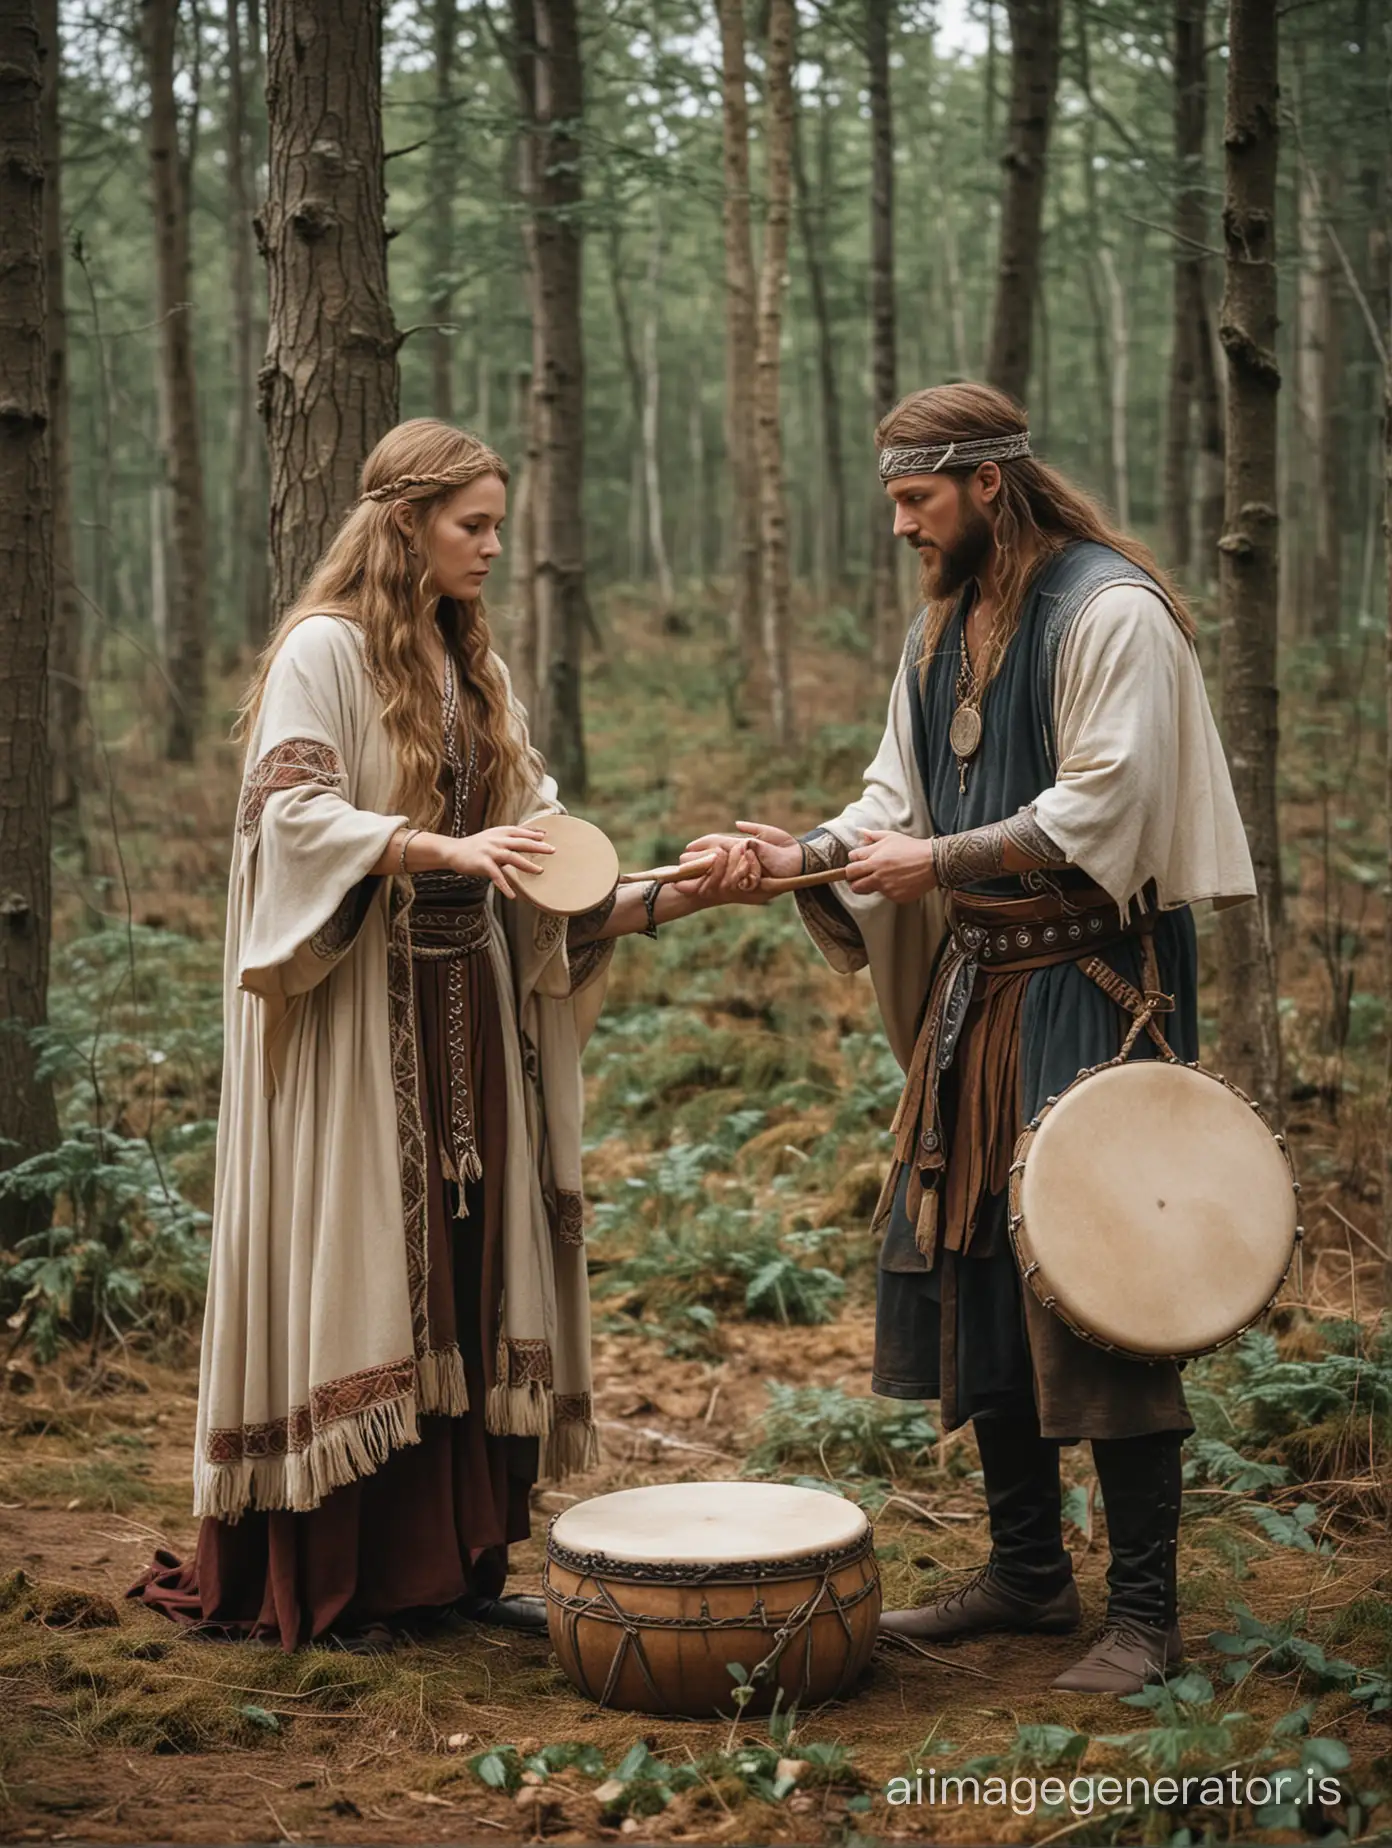 Norse woman and man playing hand drums in the woods